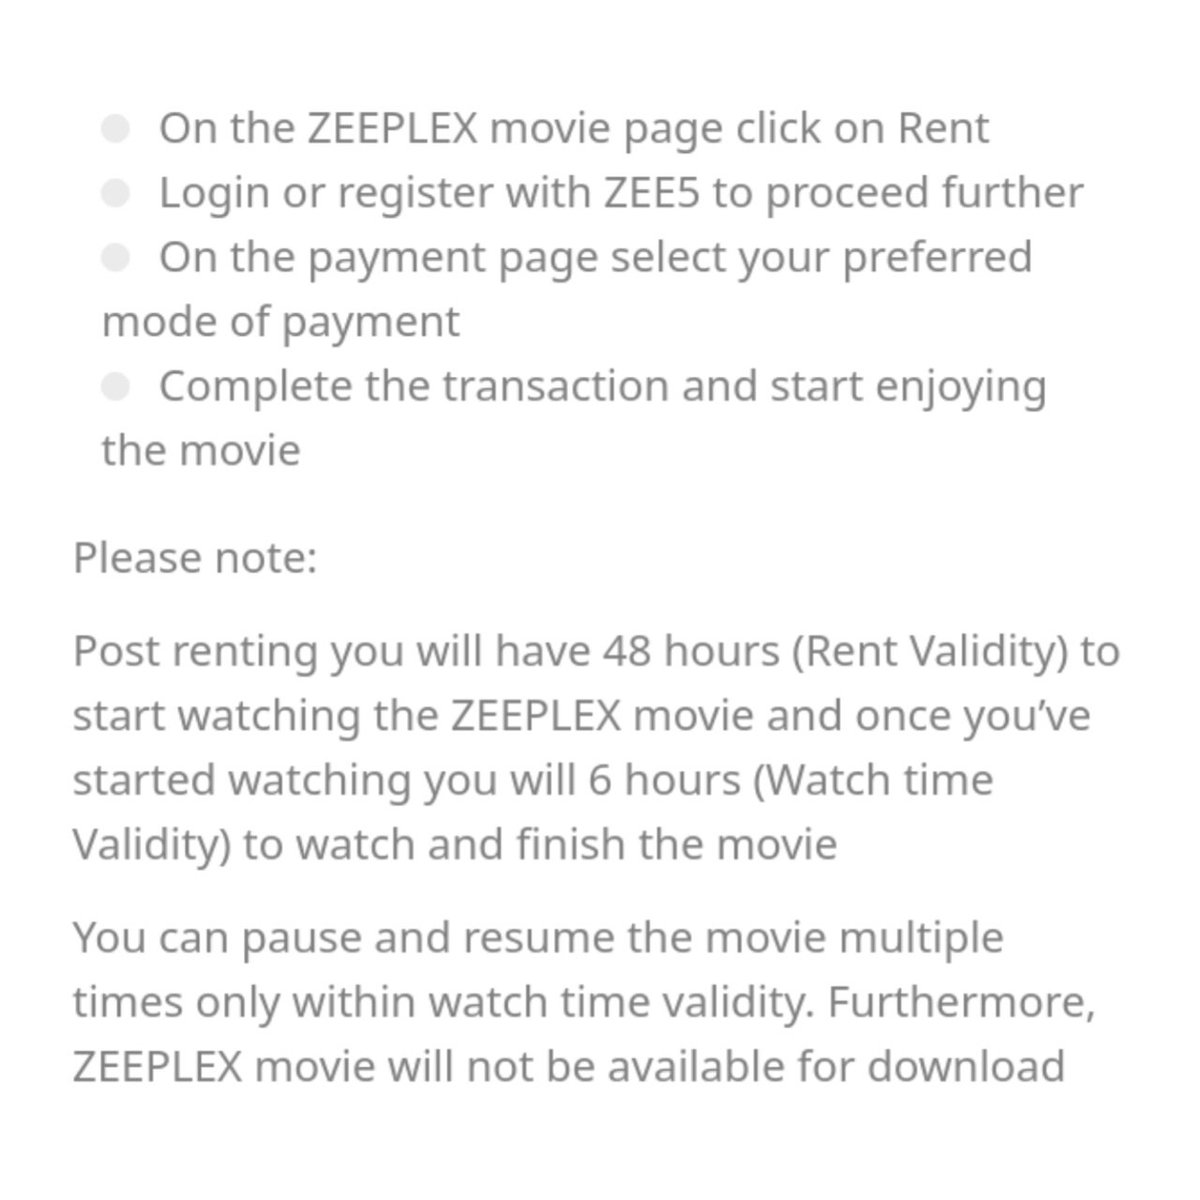 Post  #Radhe Release On 13th, You've To Signup/Login With Your Mob Number On  http://Zee5.com  or Zee5 App & Then Have To Click On Profile  My Account Zeeplex Rentals Then you Can Rent It By Following The Steps In Pic 2, You've 48 Hrs Validity & 6 Hrs Watchtime (5/n)